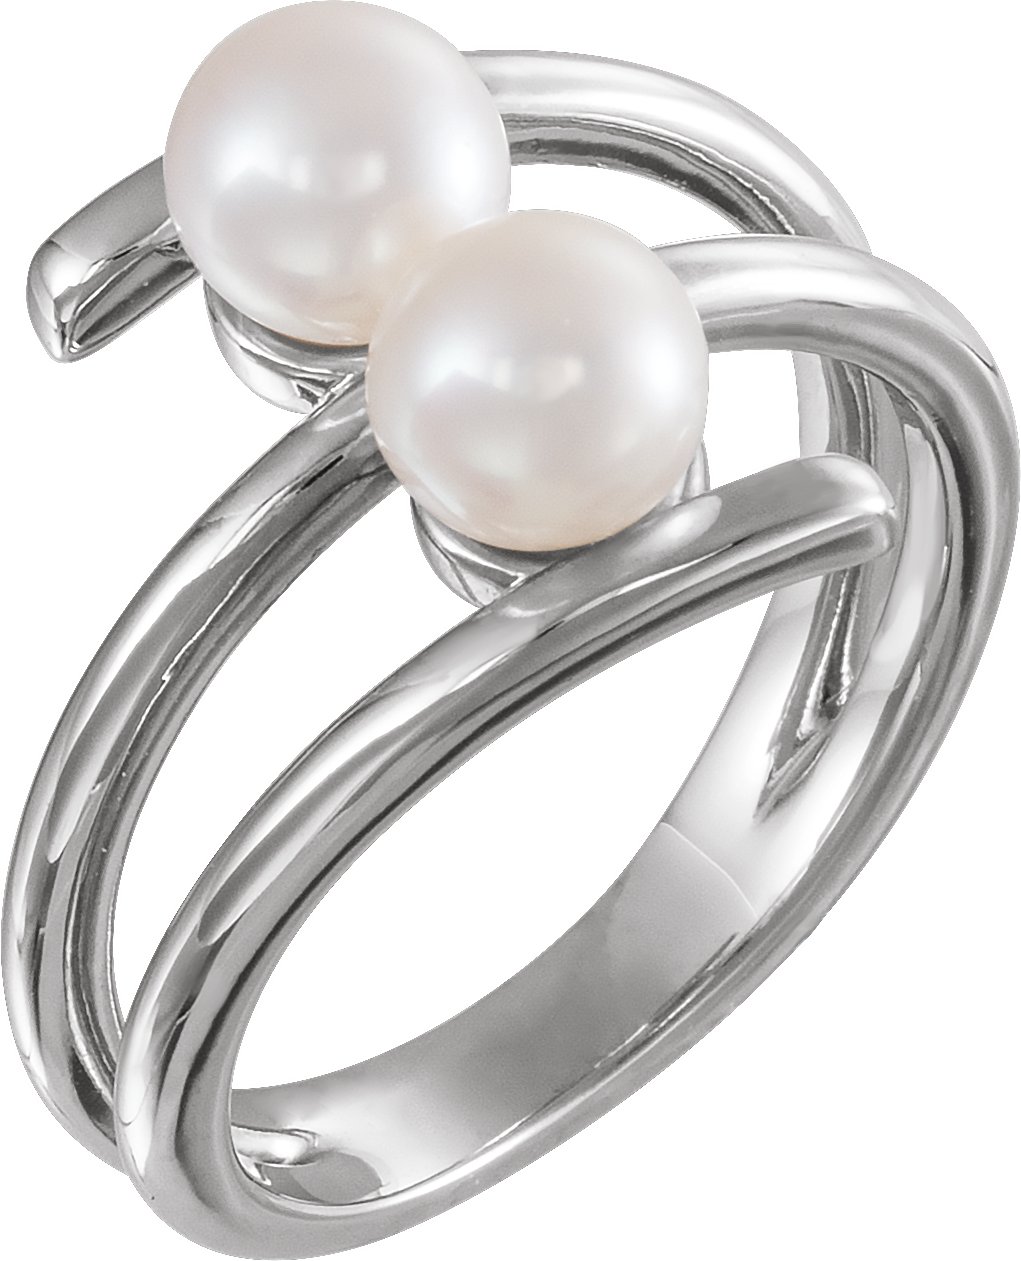 Sterling Silver Freshwater Cultured Pearl Ring  